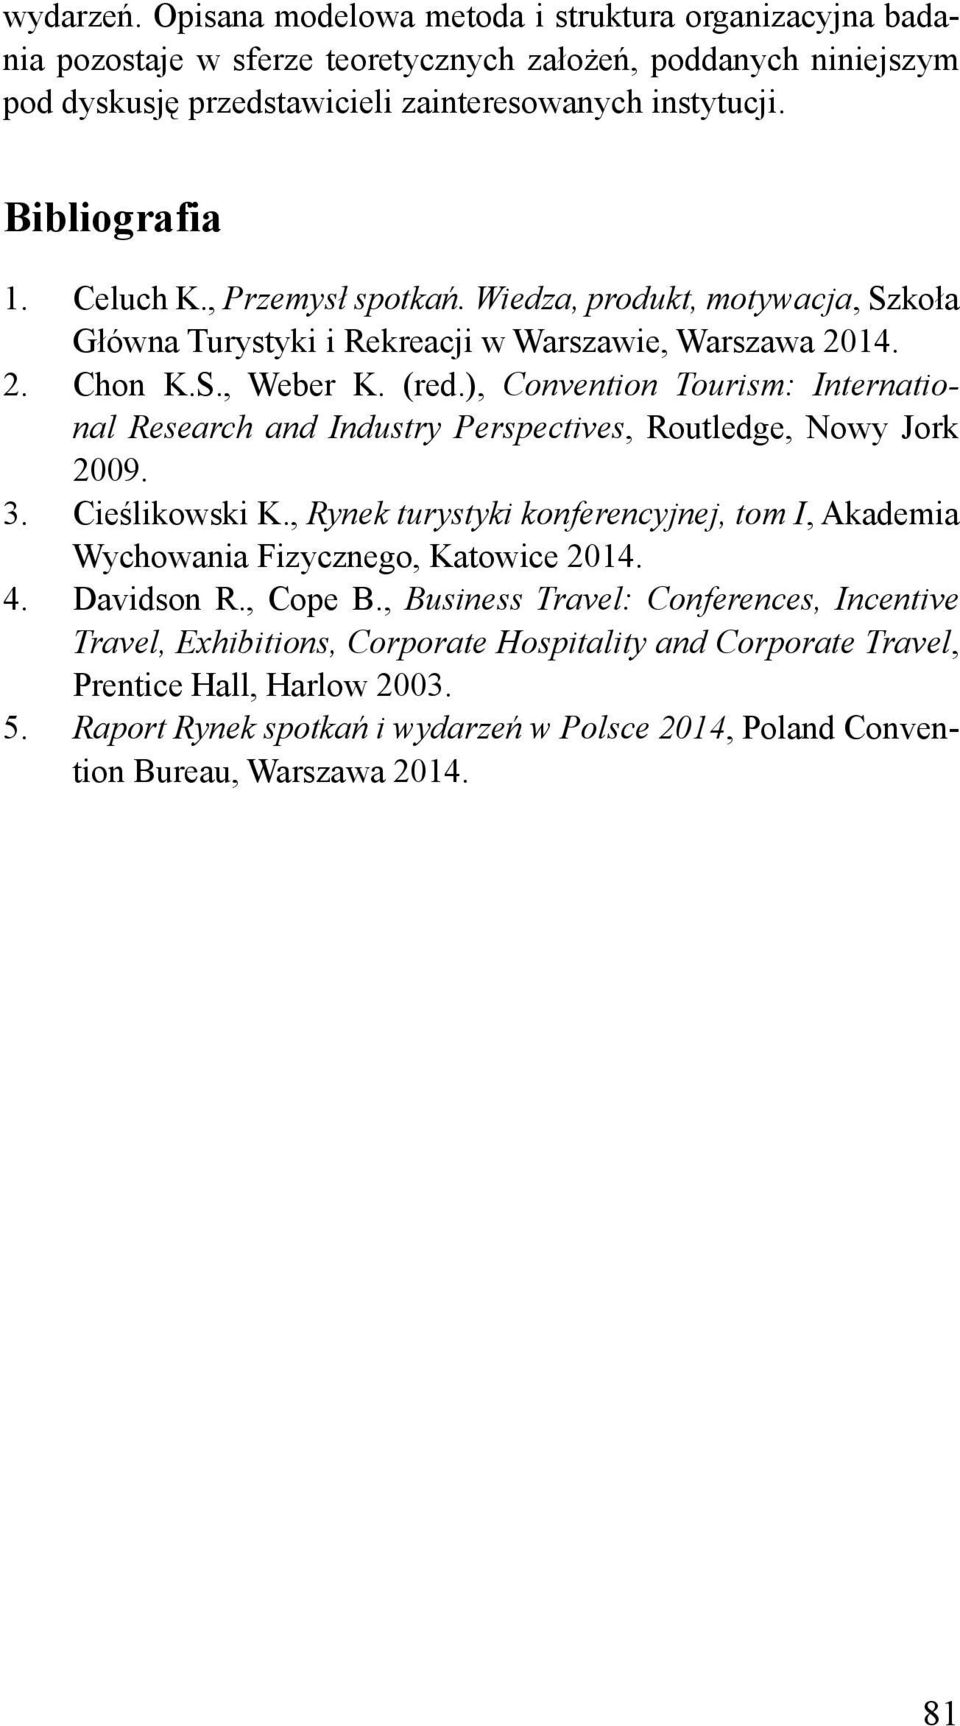 ), Convention Tourism: International Research and Industry Perspectives, Routledge, Nowy Jork 2009. 3. Cieślikowski K.